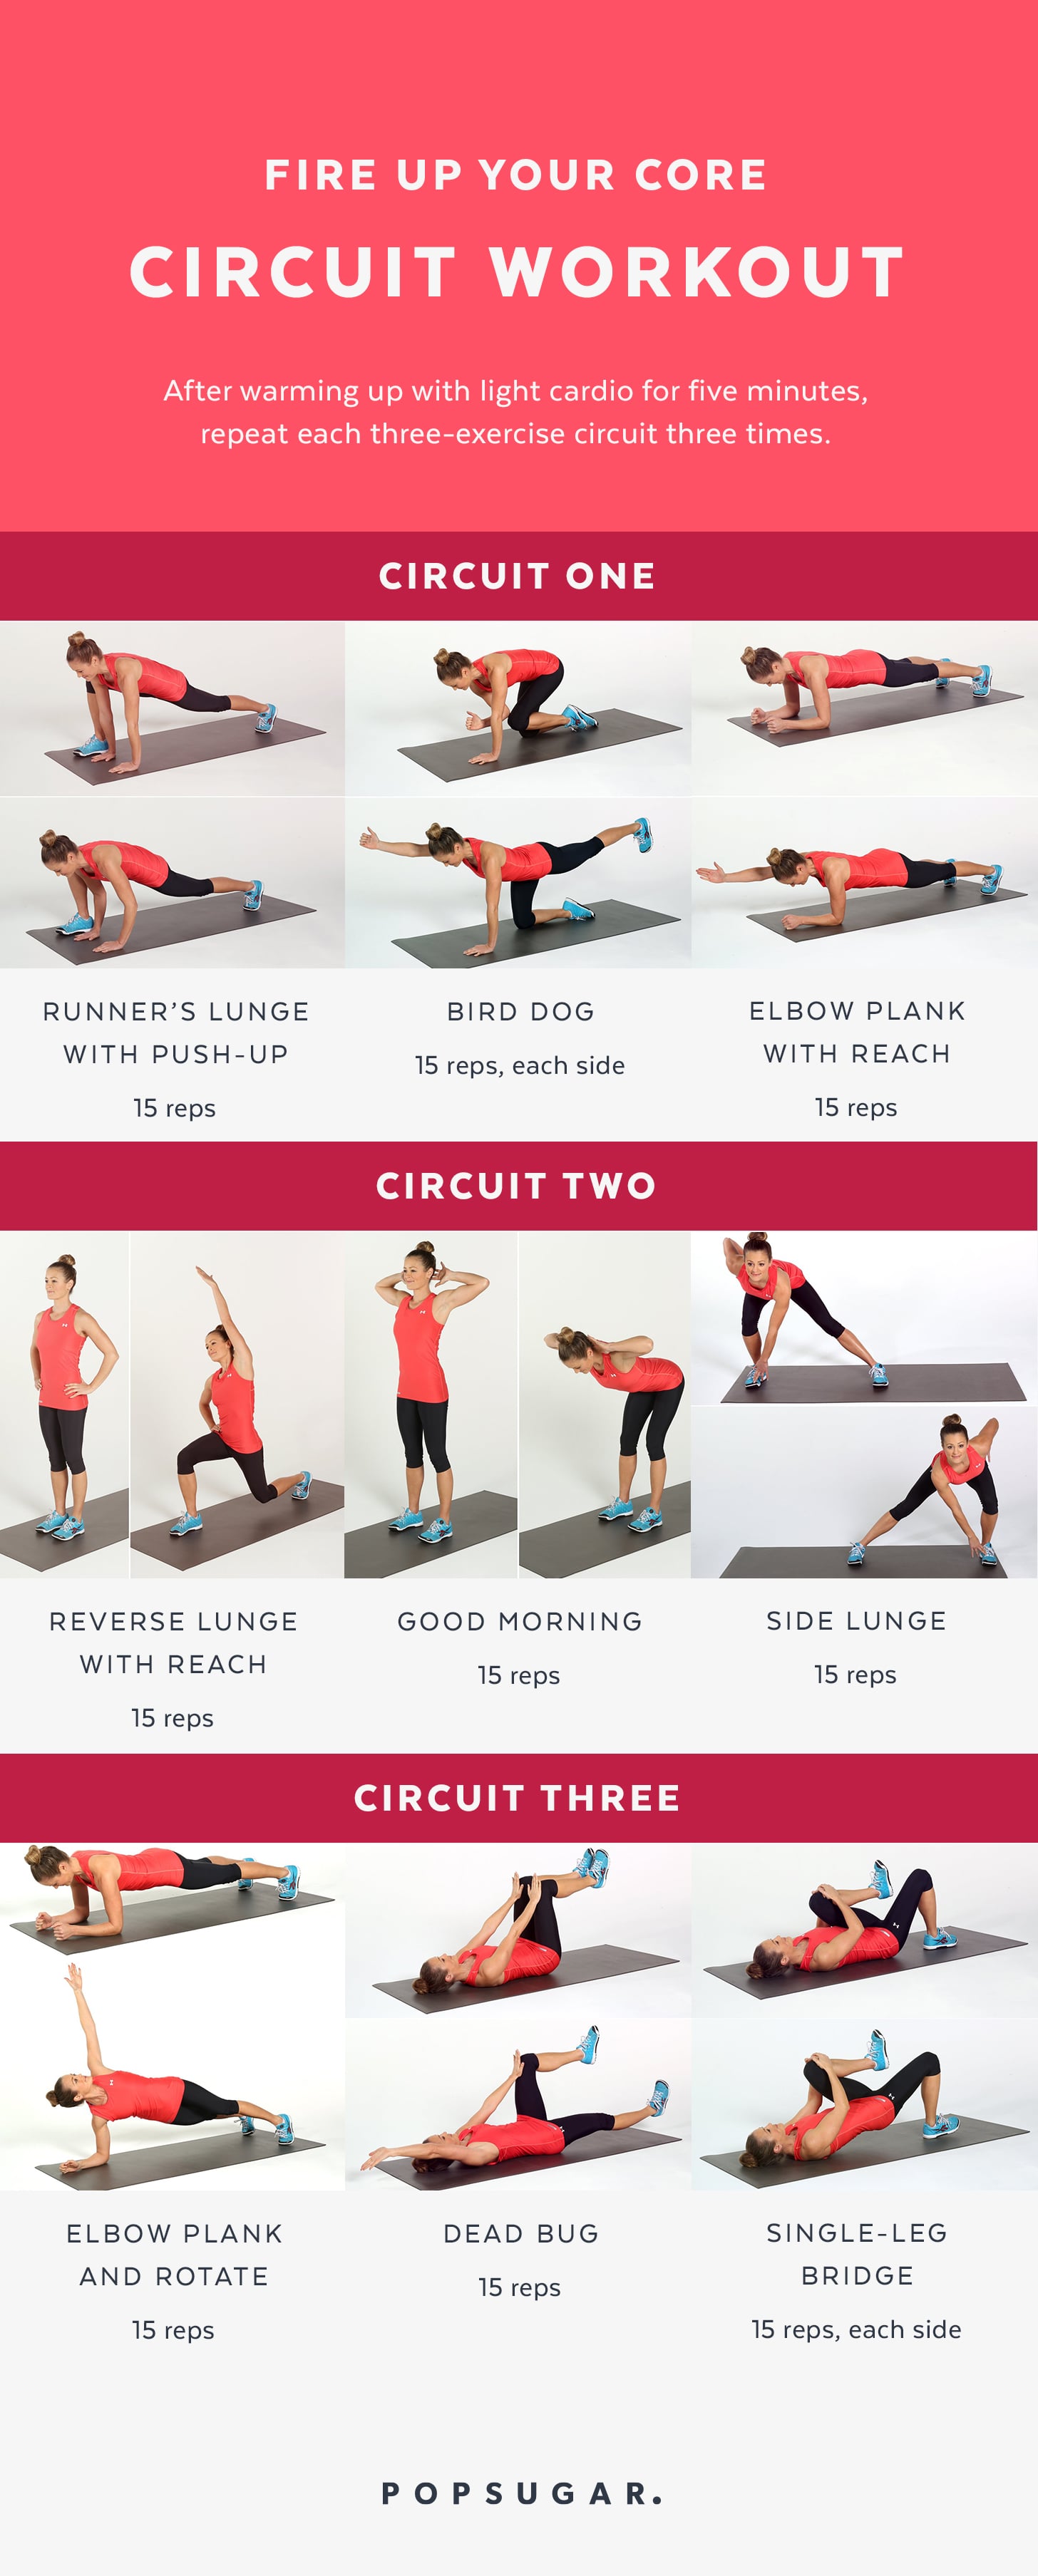 10 Free Printable Workouts to Get Fit Anywhere